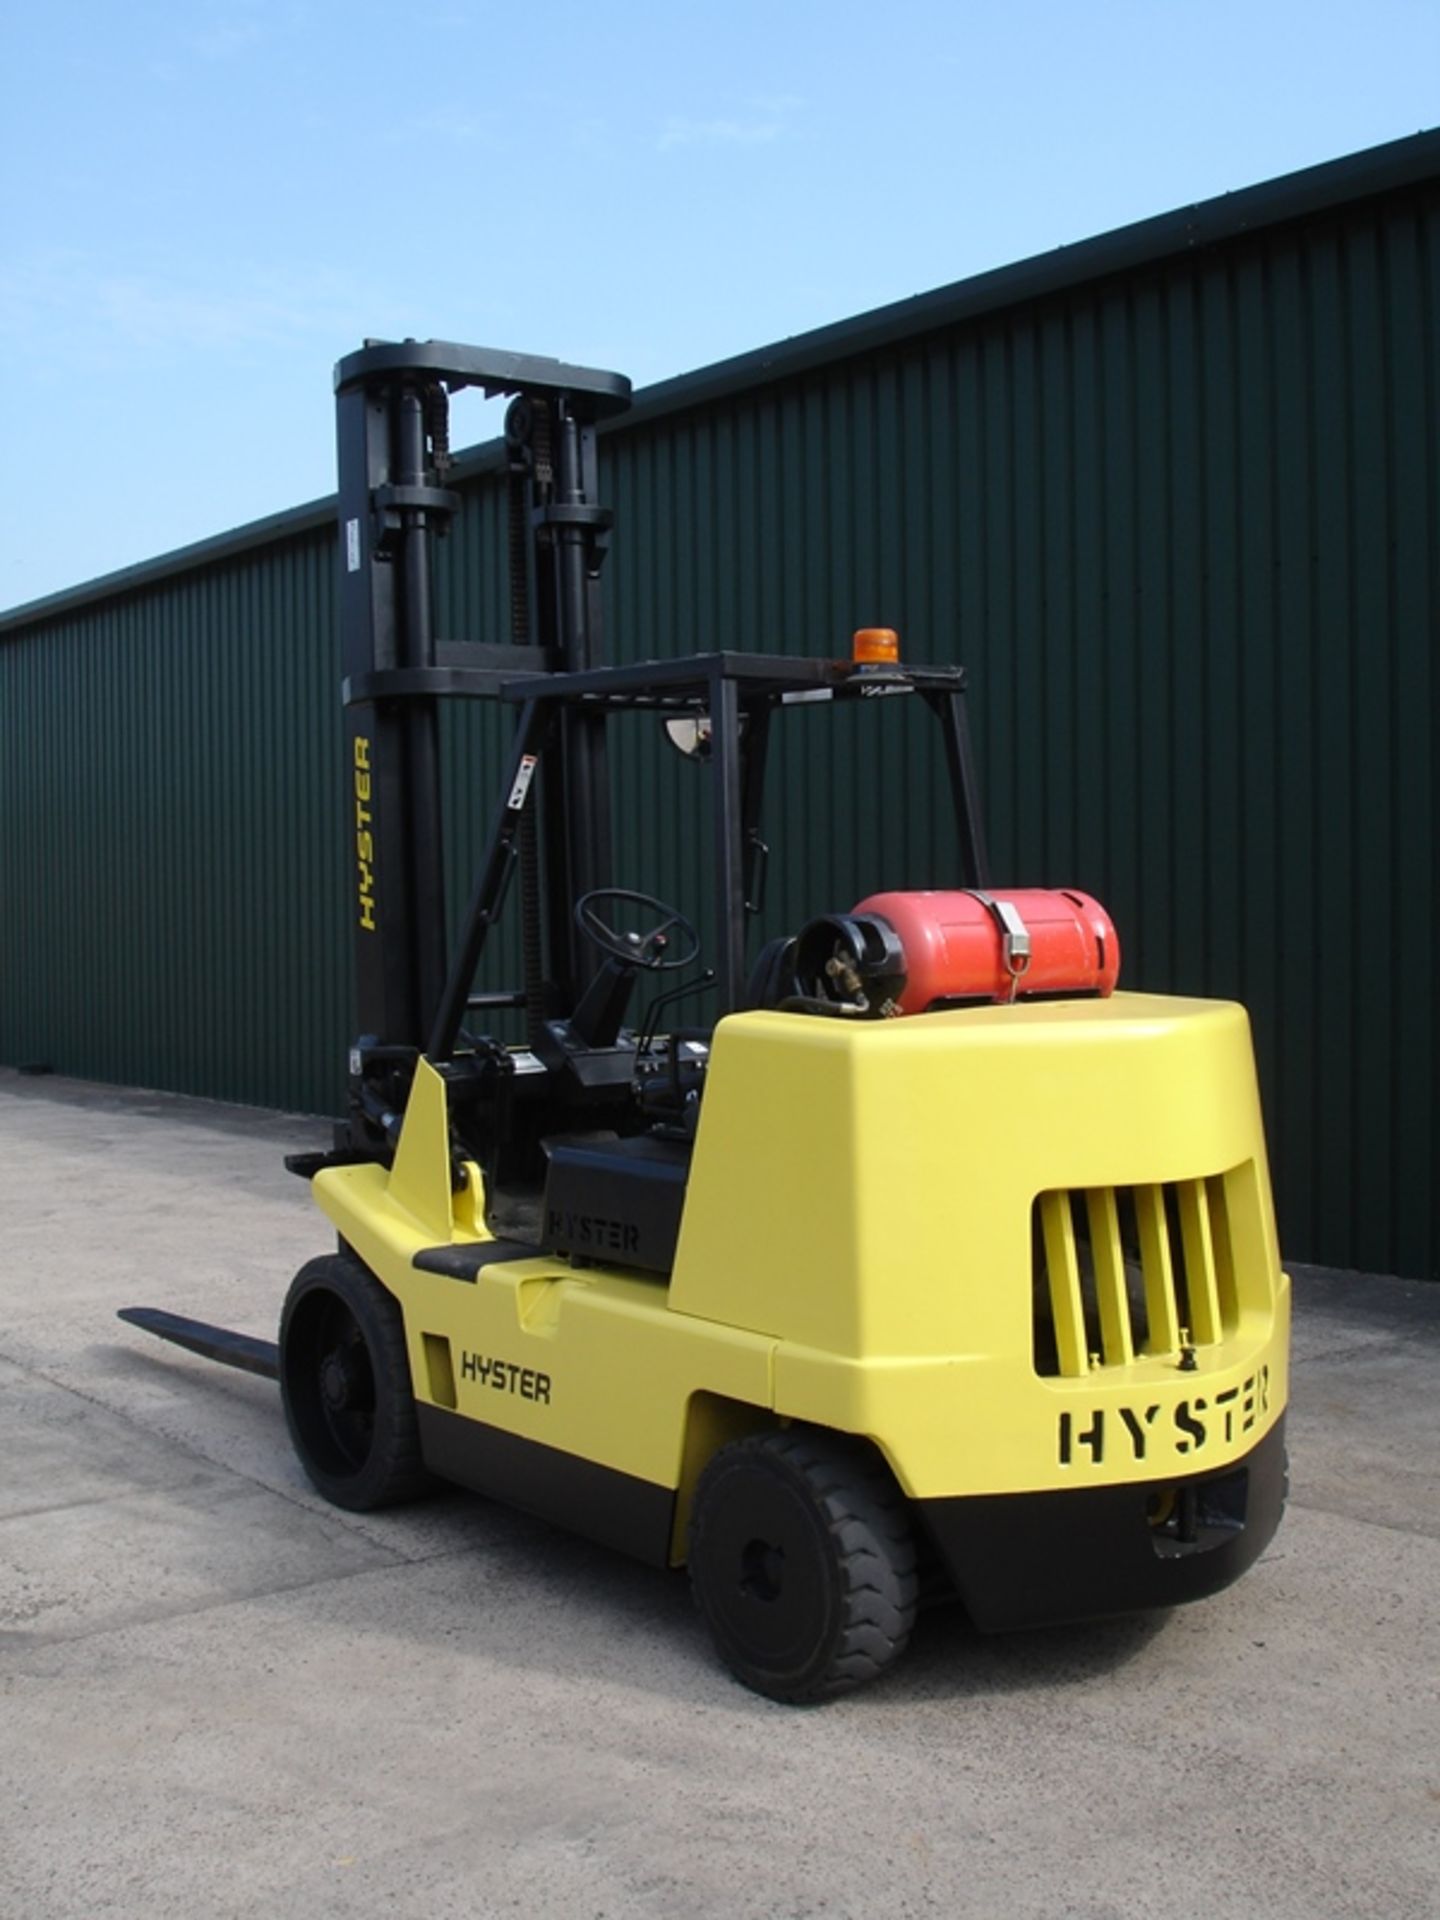 HYSTER COMPACT 7 TON FORKLIFT - Image 2 of 6